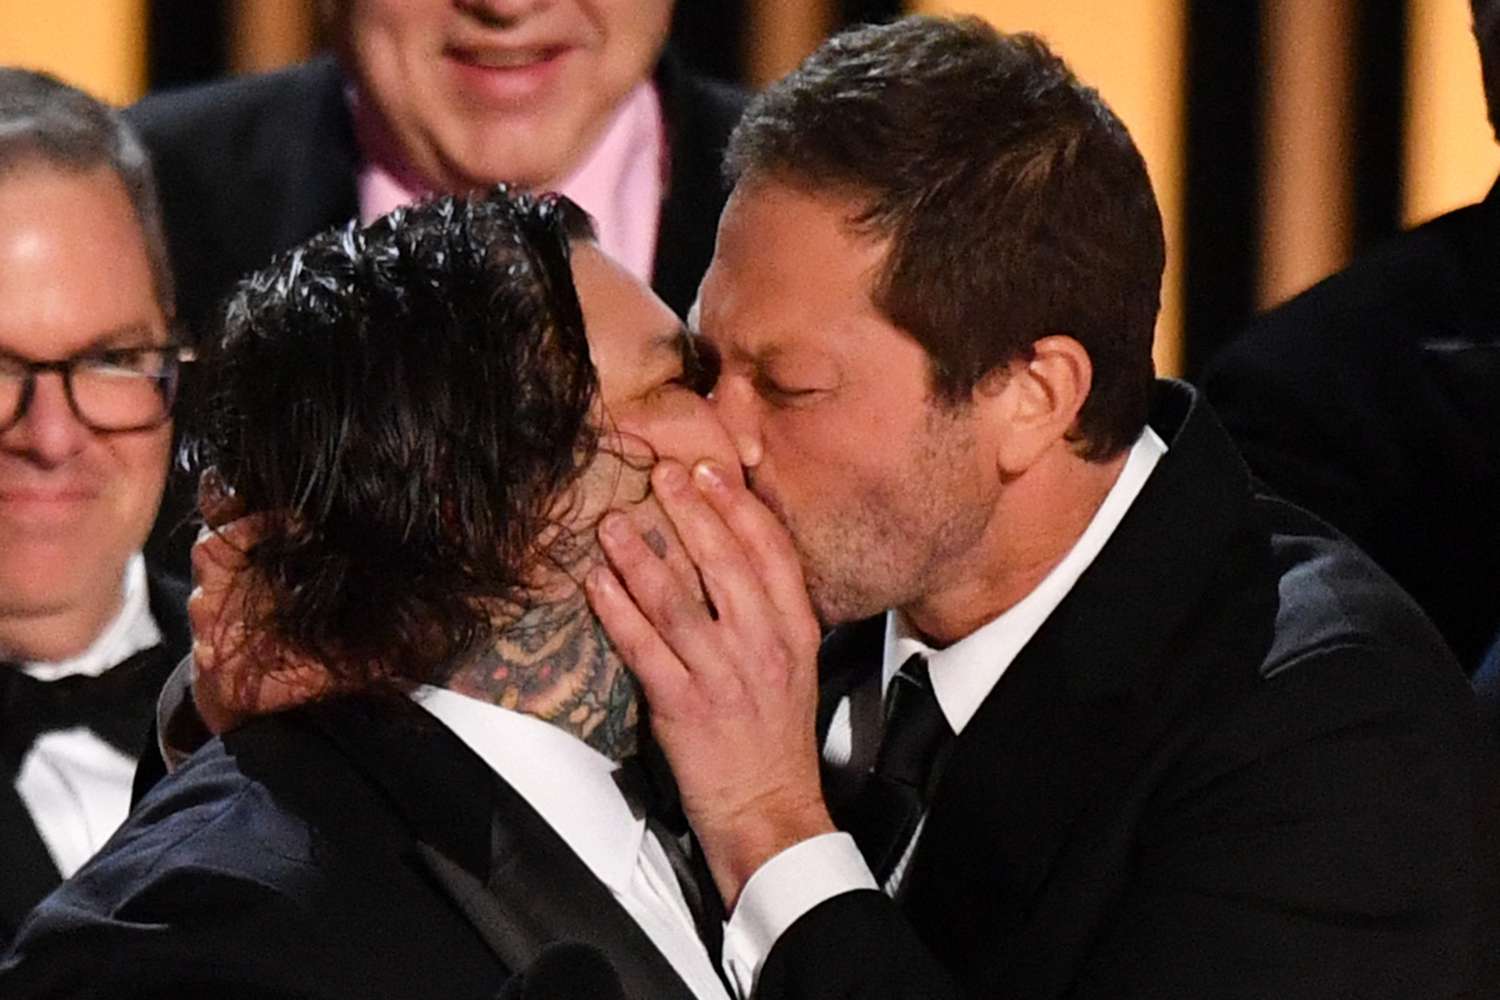 Ebon Moss-Bachrach of 'The Bear' Shares a Kiss with Matty Matheson Following Victory in Best Comedy Series Category